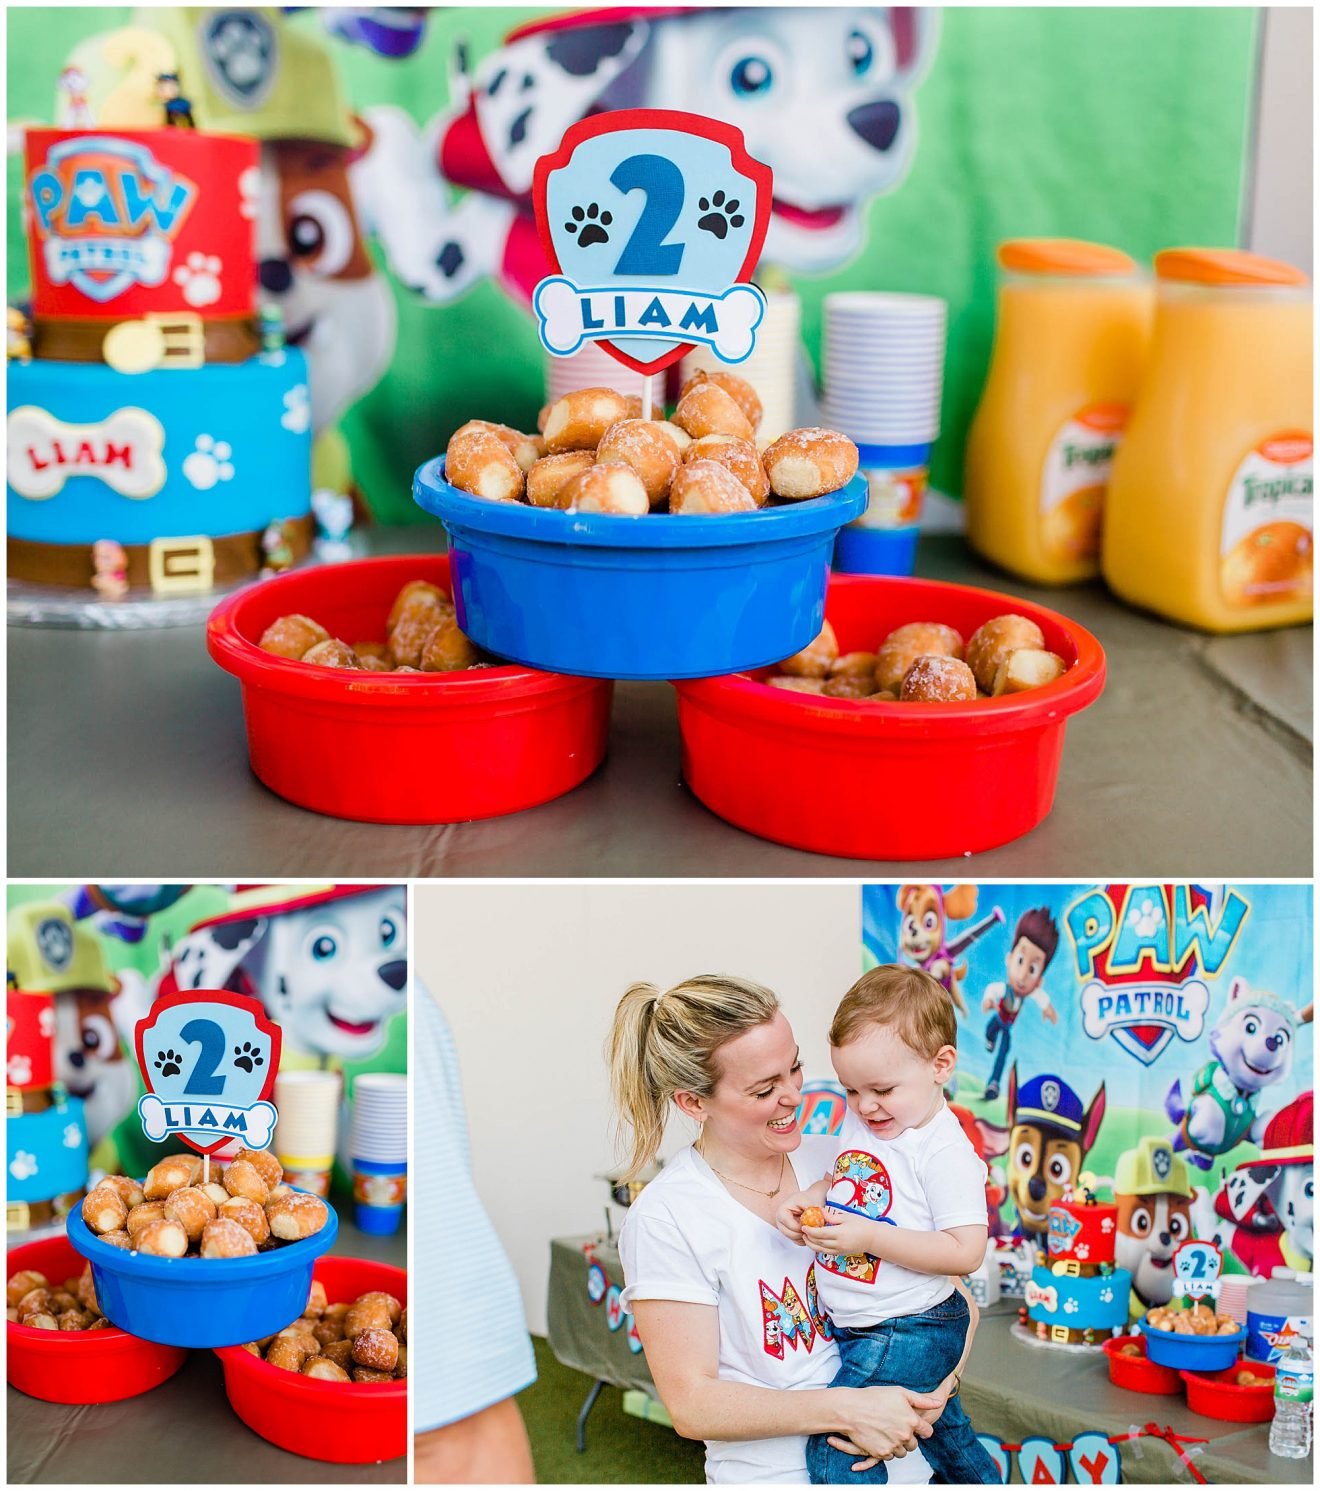 Paw Patrol birthday cake sign with donut holes in dog bowls.